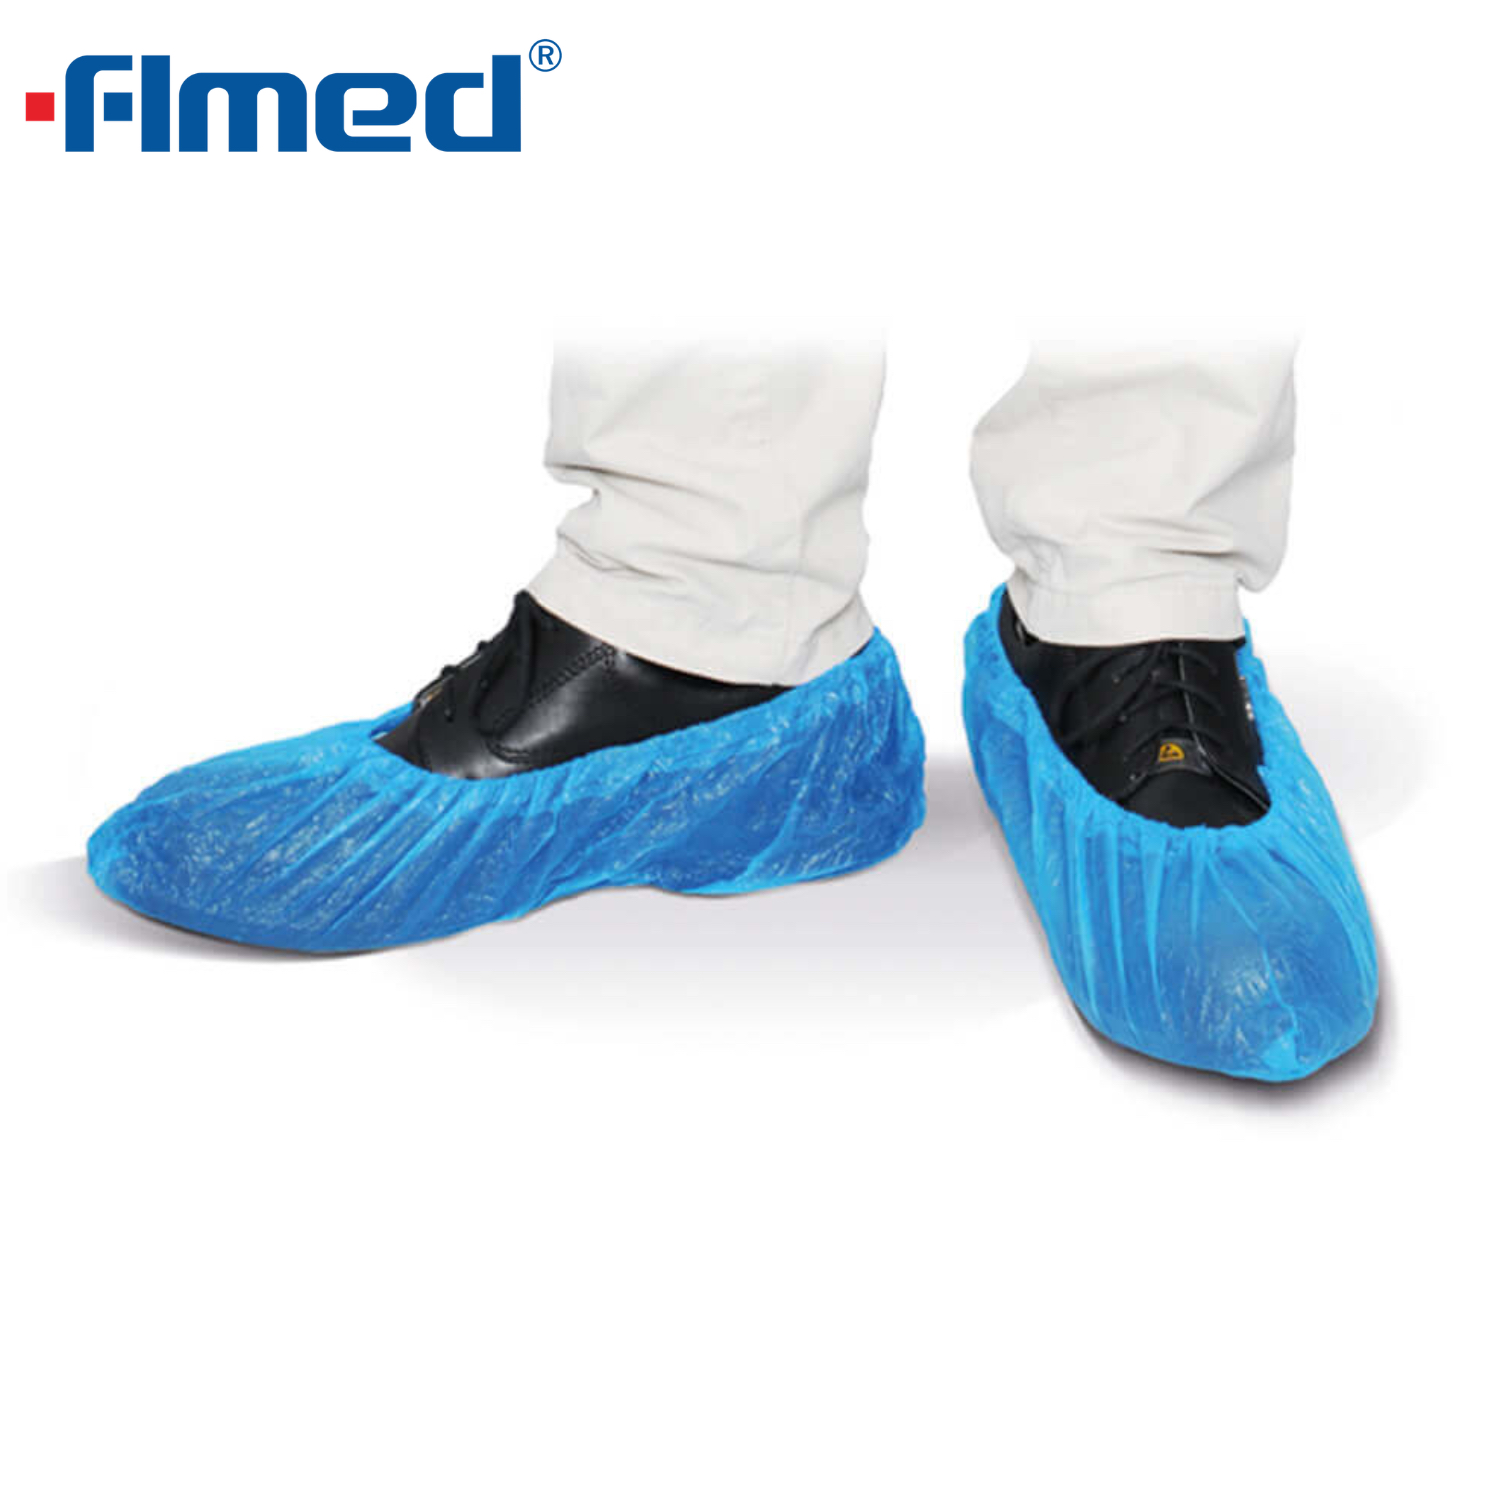 Shoe Covers in Healthcare: Keeping Environments Clean and Safe